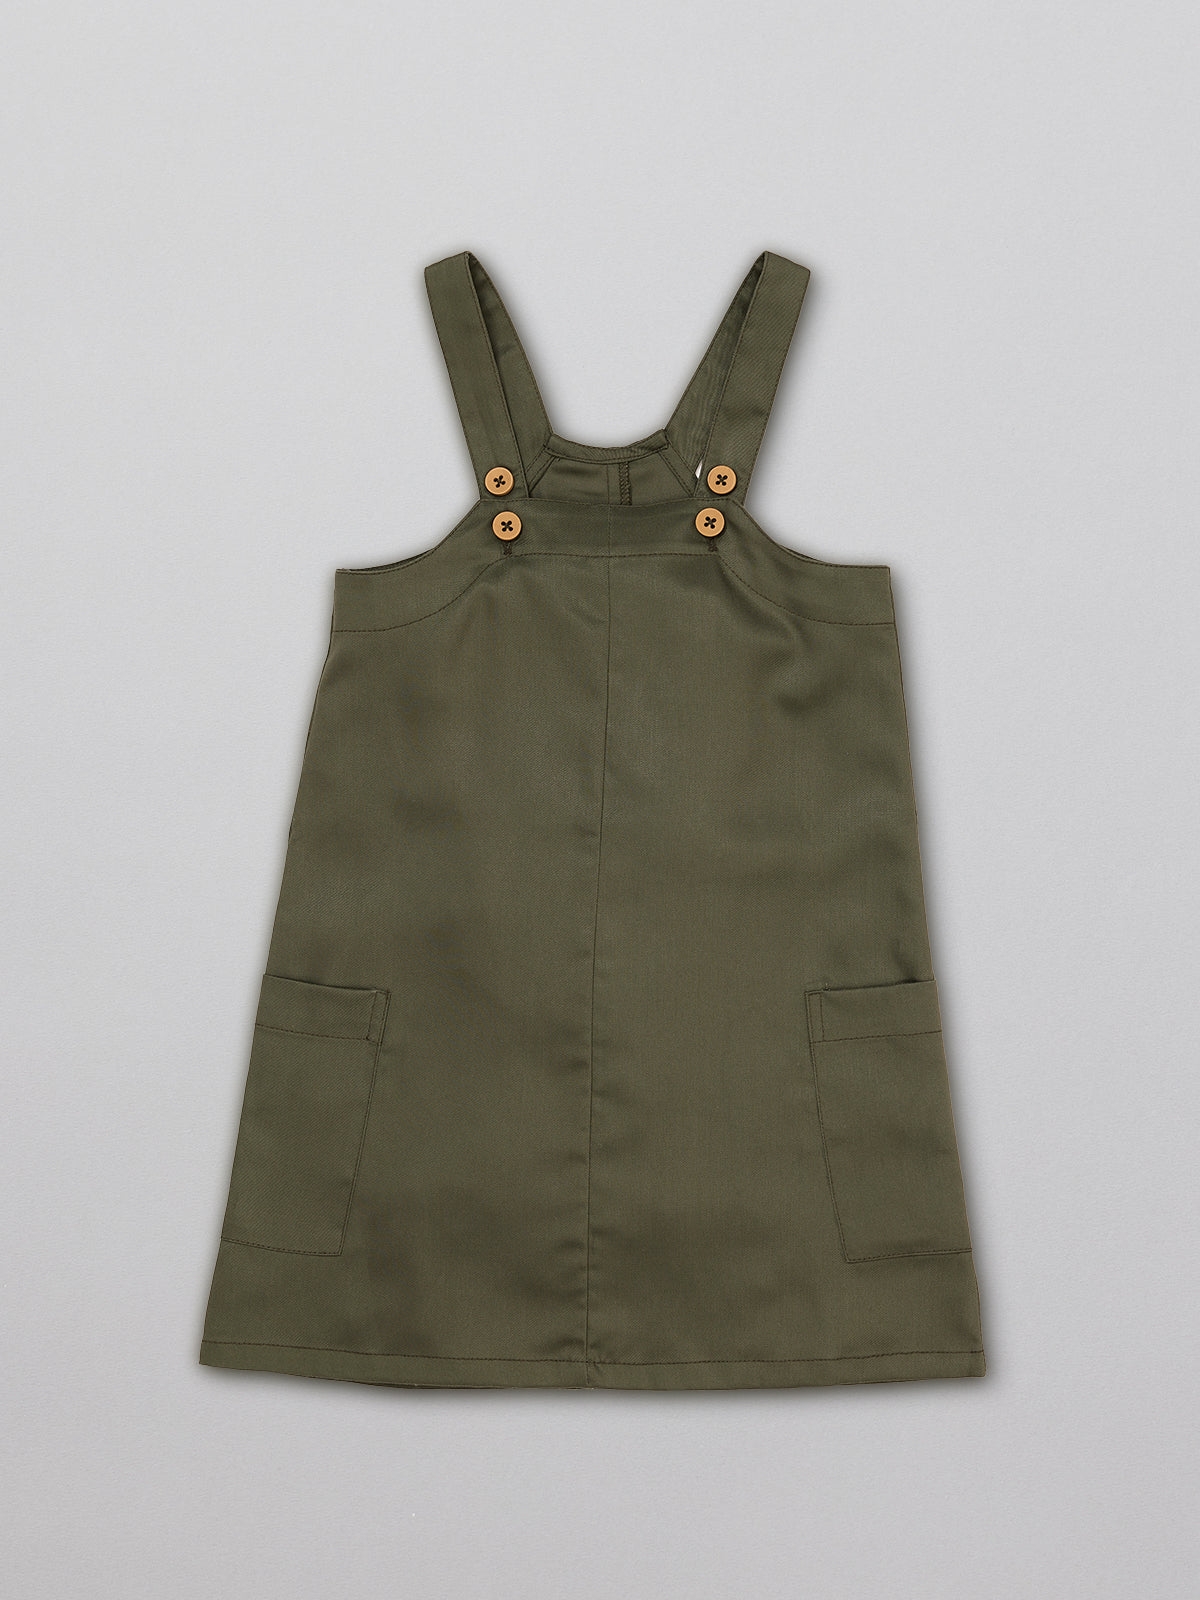 Sustainable kids pinafore dress with pockets, pictured from the front.